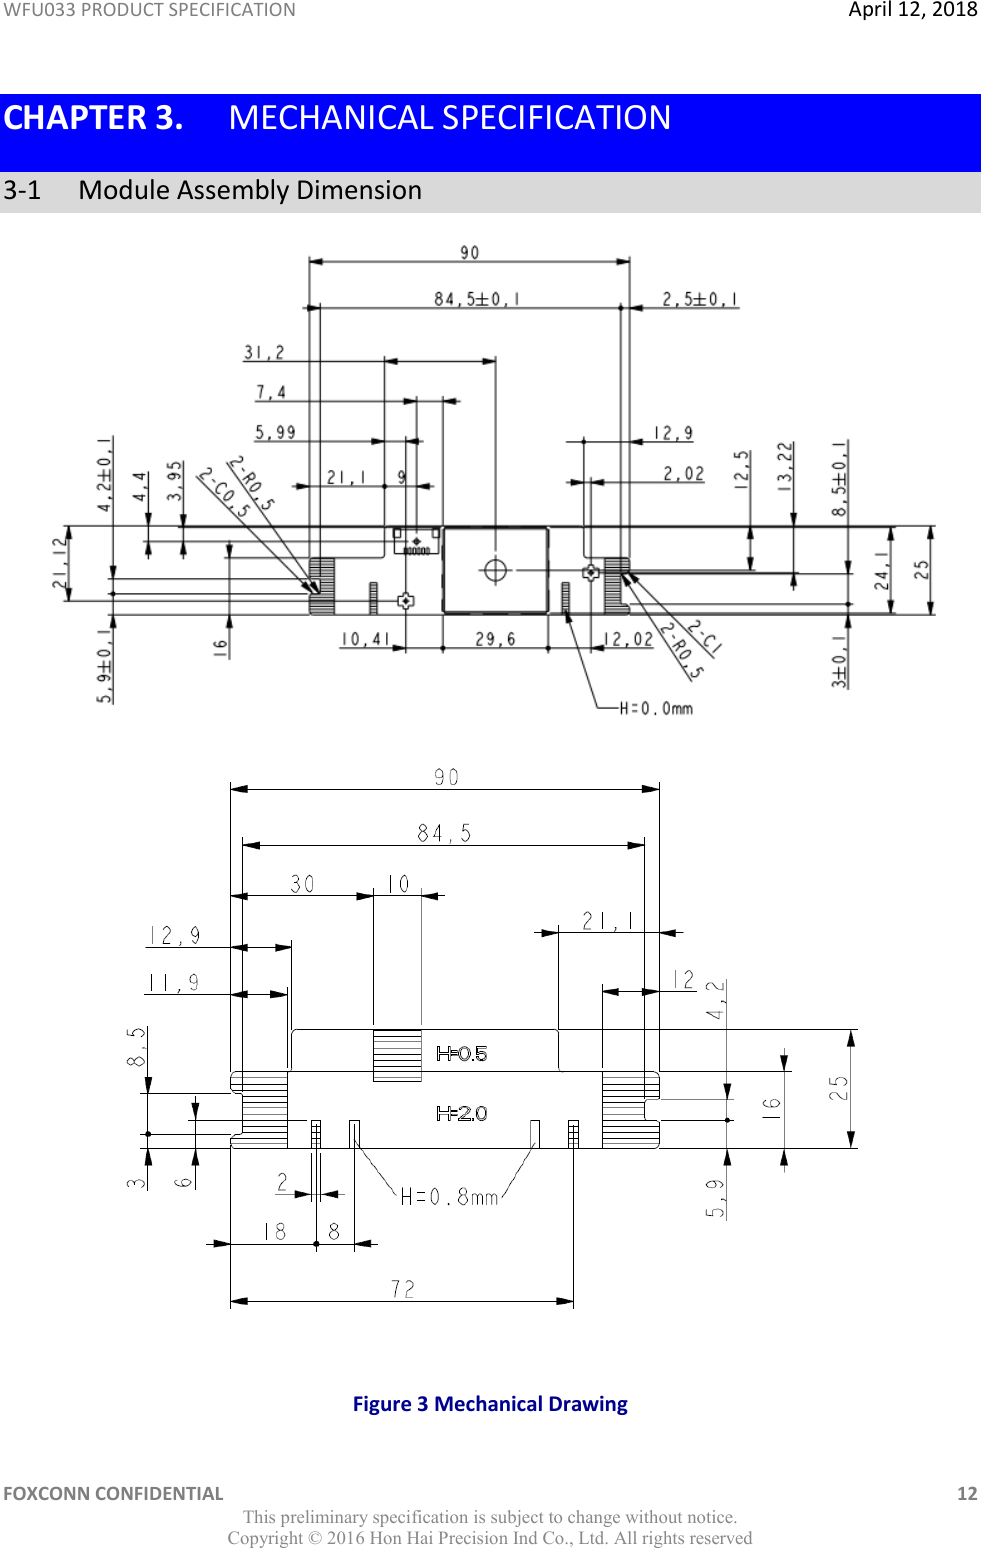 WFU033 PRODUCT SPECIFICATION  April 12, 2018 FOXCONN CONFIDENTIAL    12 This preliminary specification is subject to change without notice. Copyright ©  2016 Hon Hai Precision Ind Co., Ltd. All rights reserved CHAPTER 3. MECHANICAL SPECIFICATION 3-1   Module Assembly Dimension    Figure 3 Mechanical Drawing 